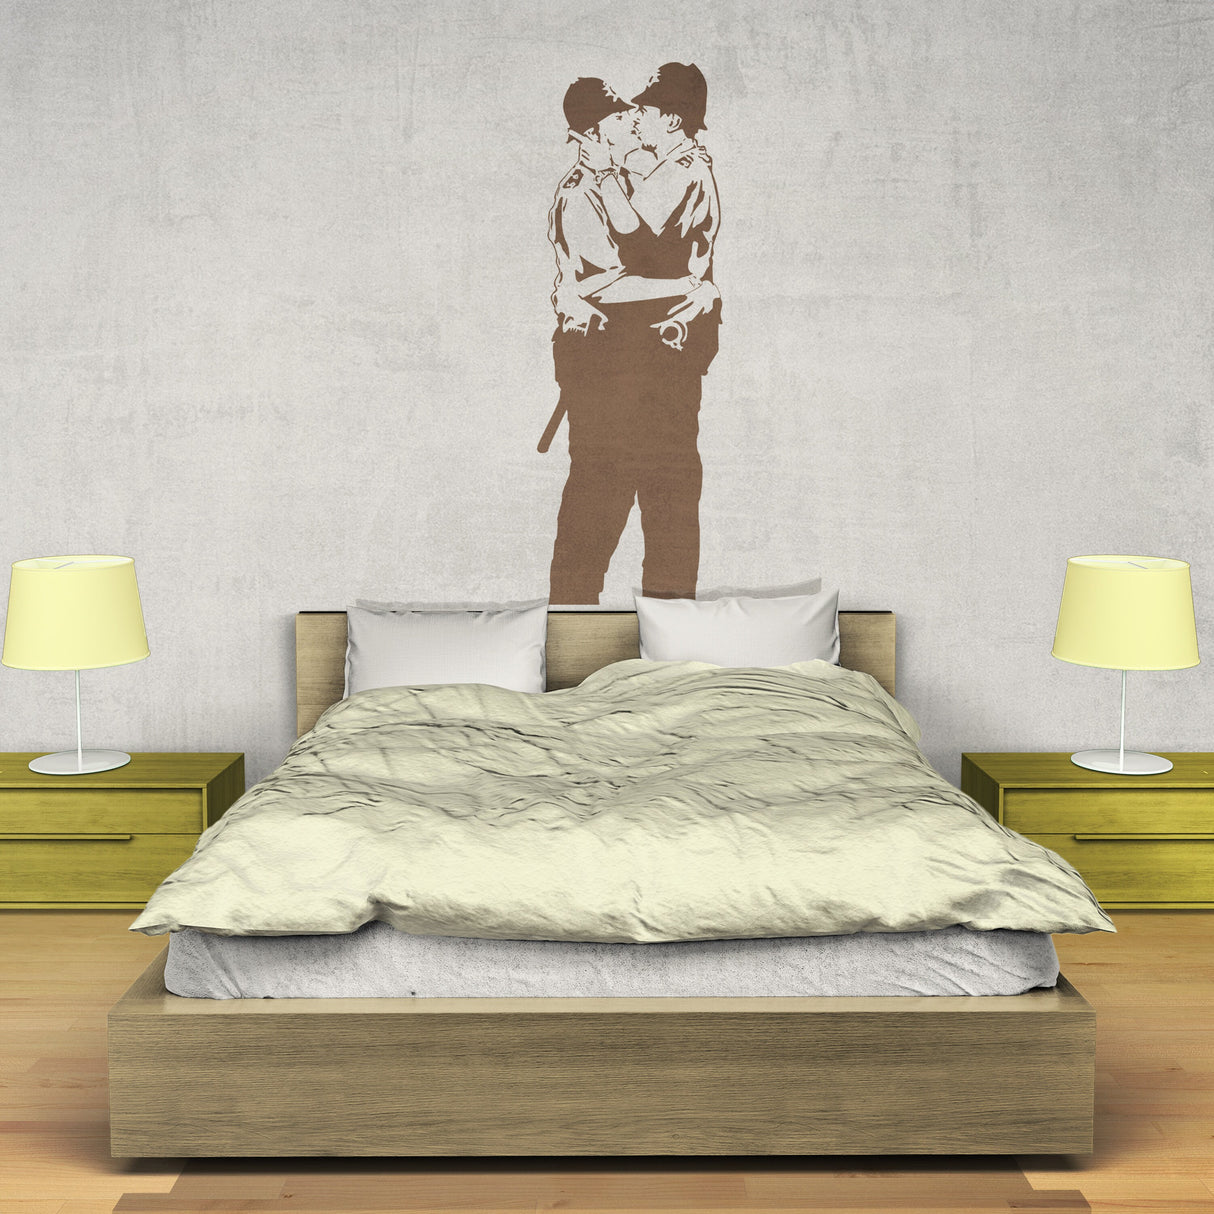 Banksy Police Kissing Wall Sticker - Street Art Peel and Stick Vinyl Decal